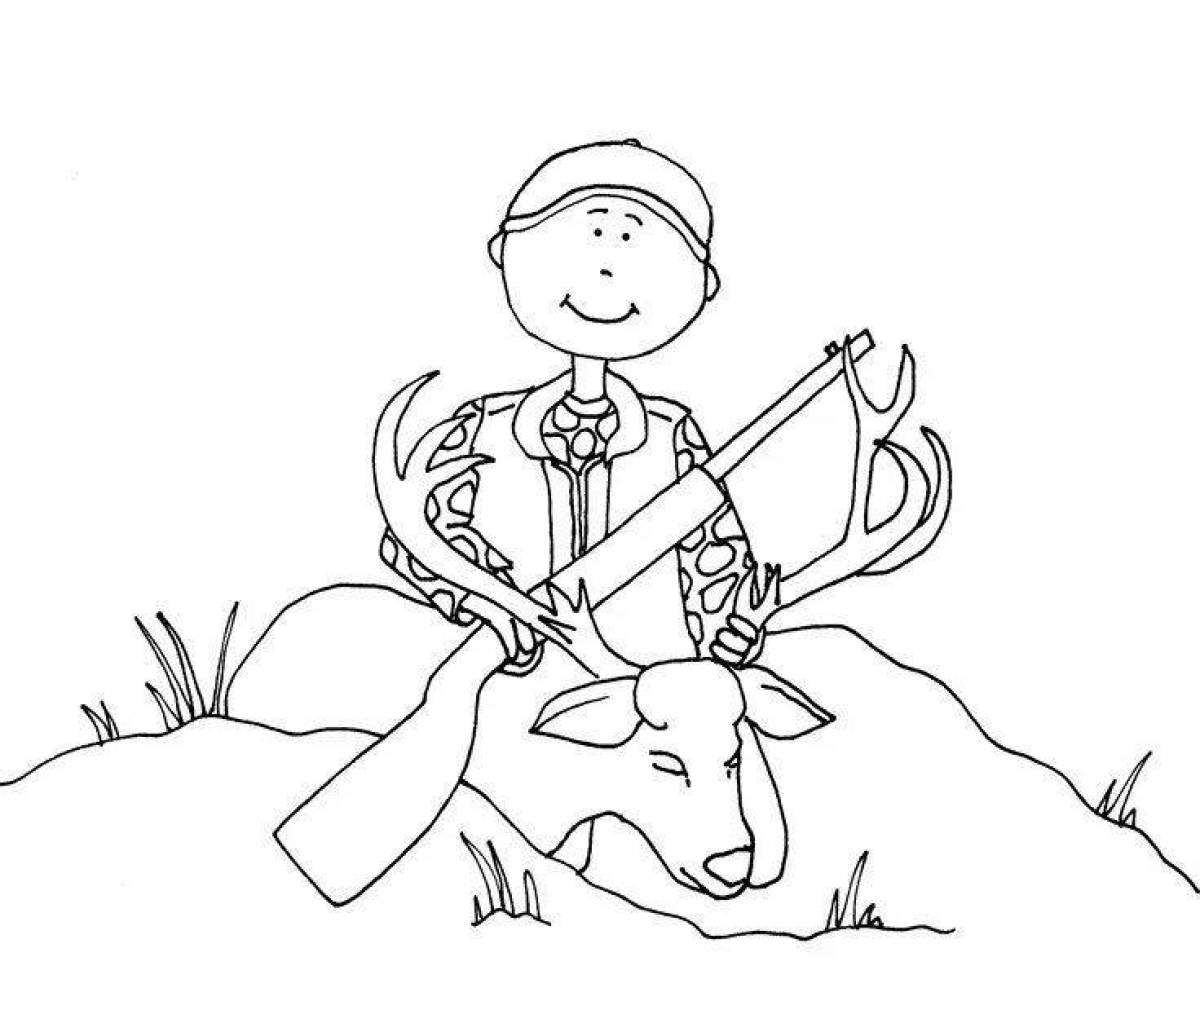 Fast hunter coloring page